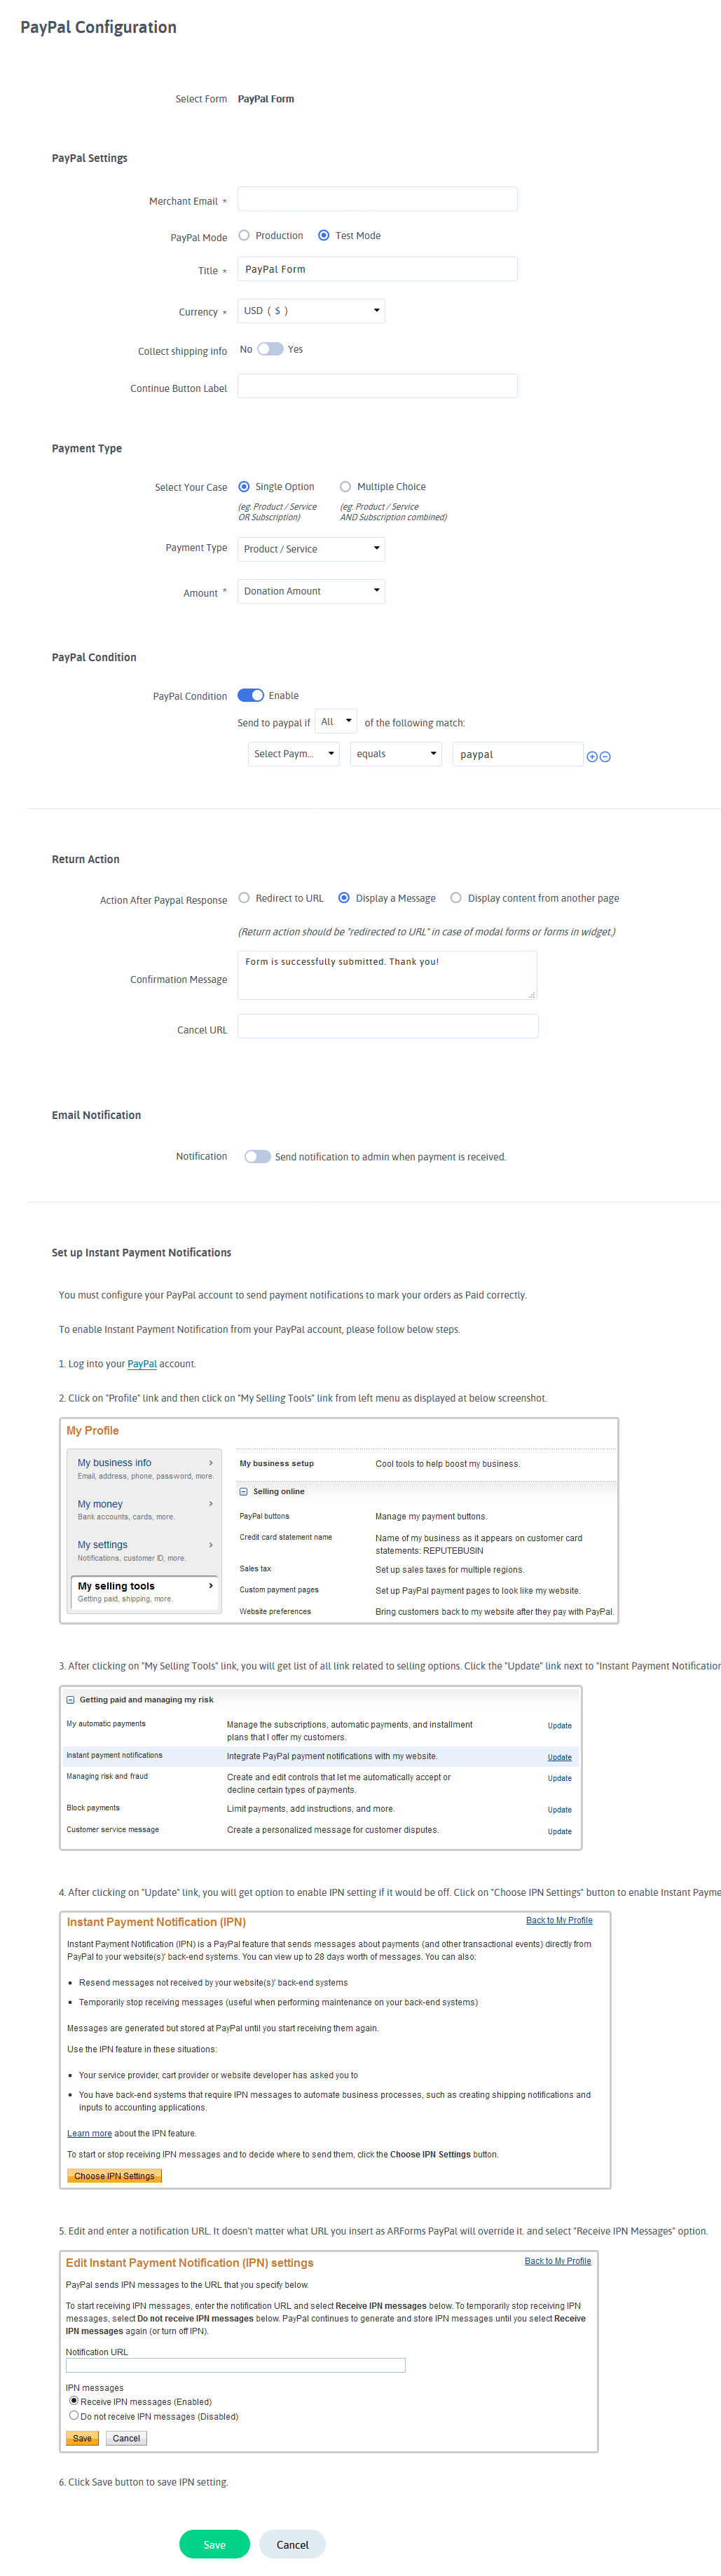 ARFoms PayPal - Configure PayPal Forms